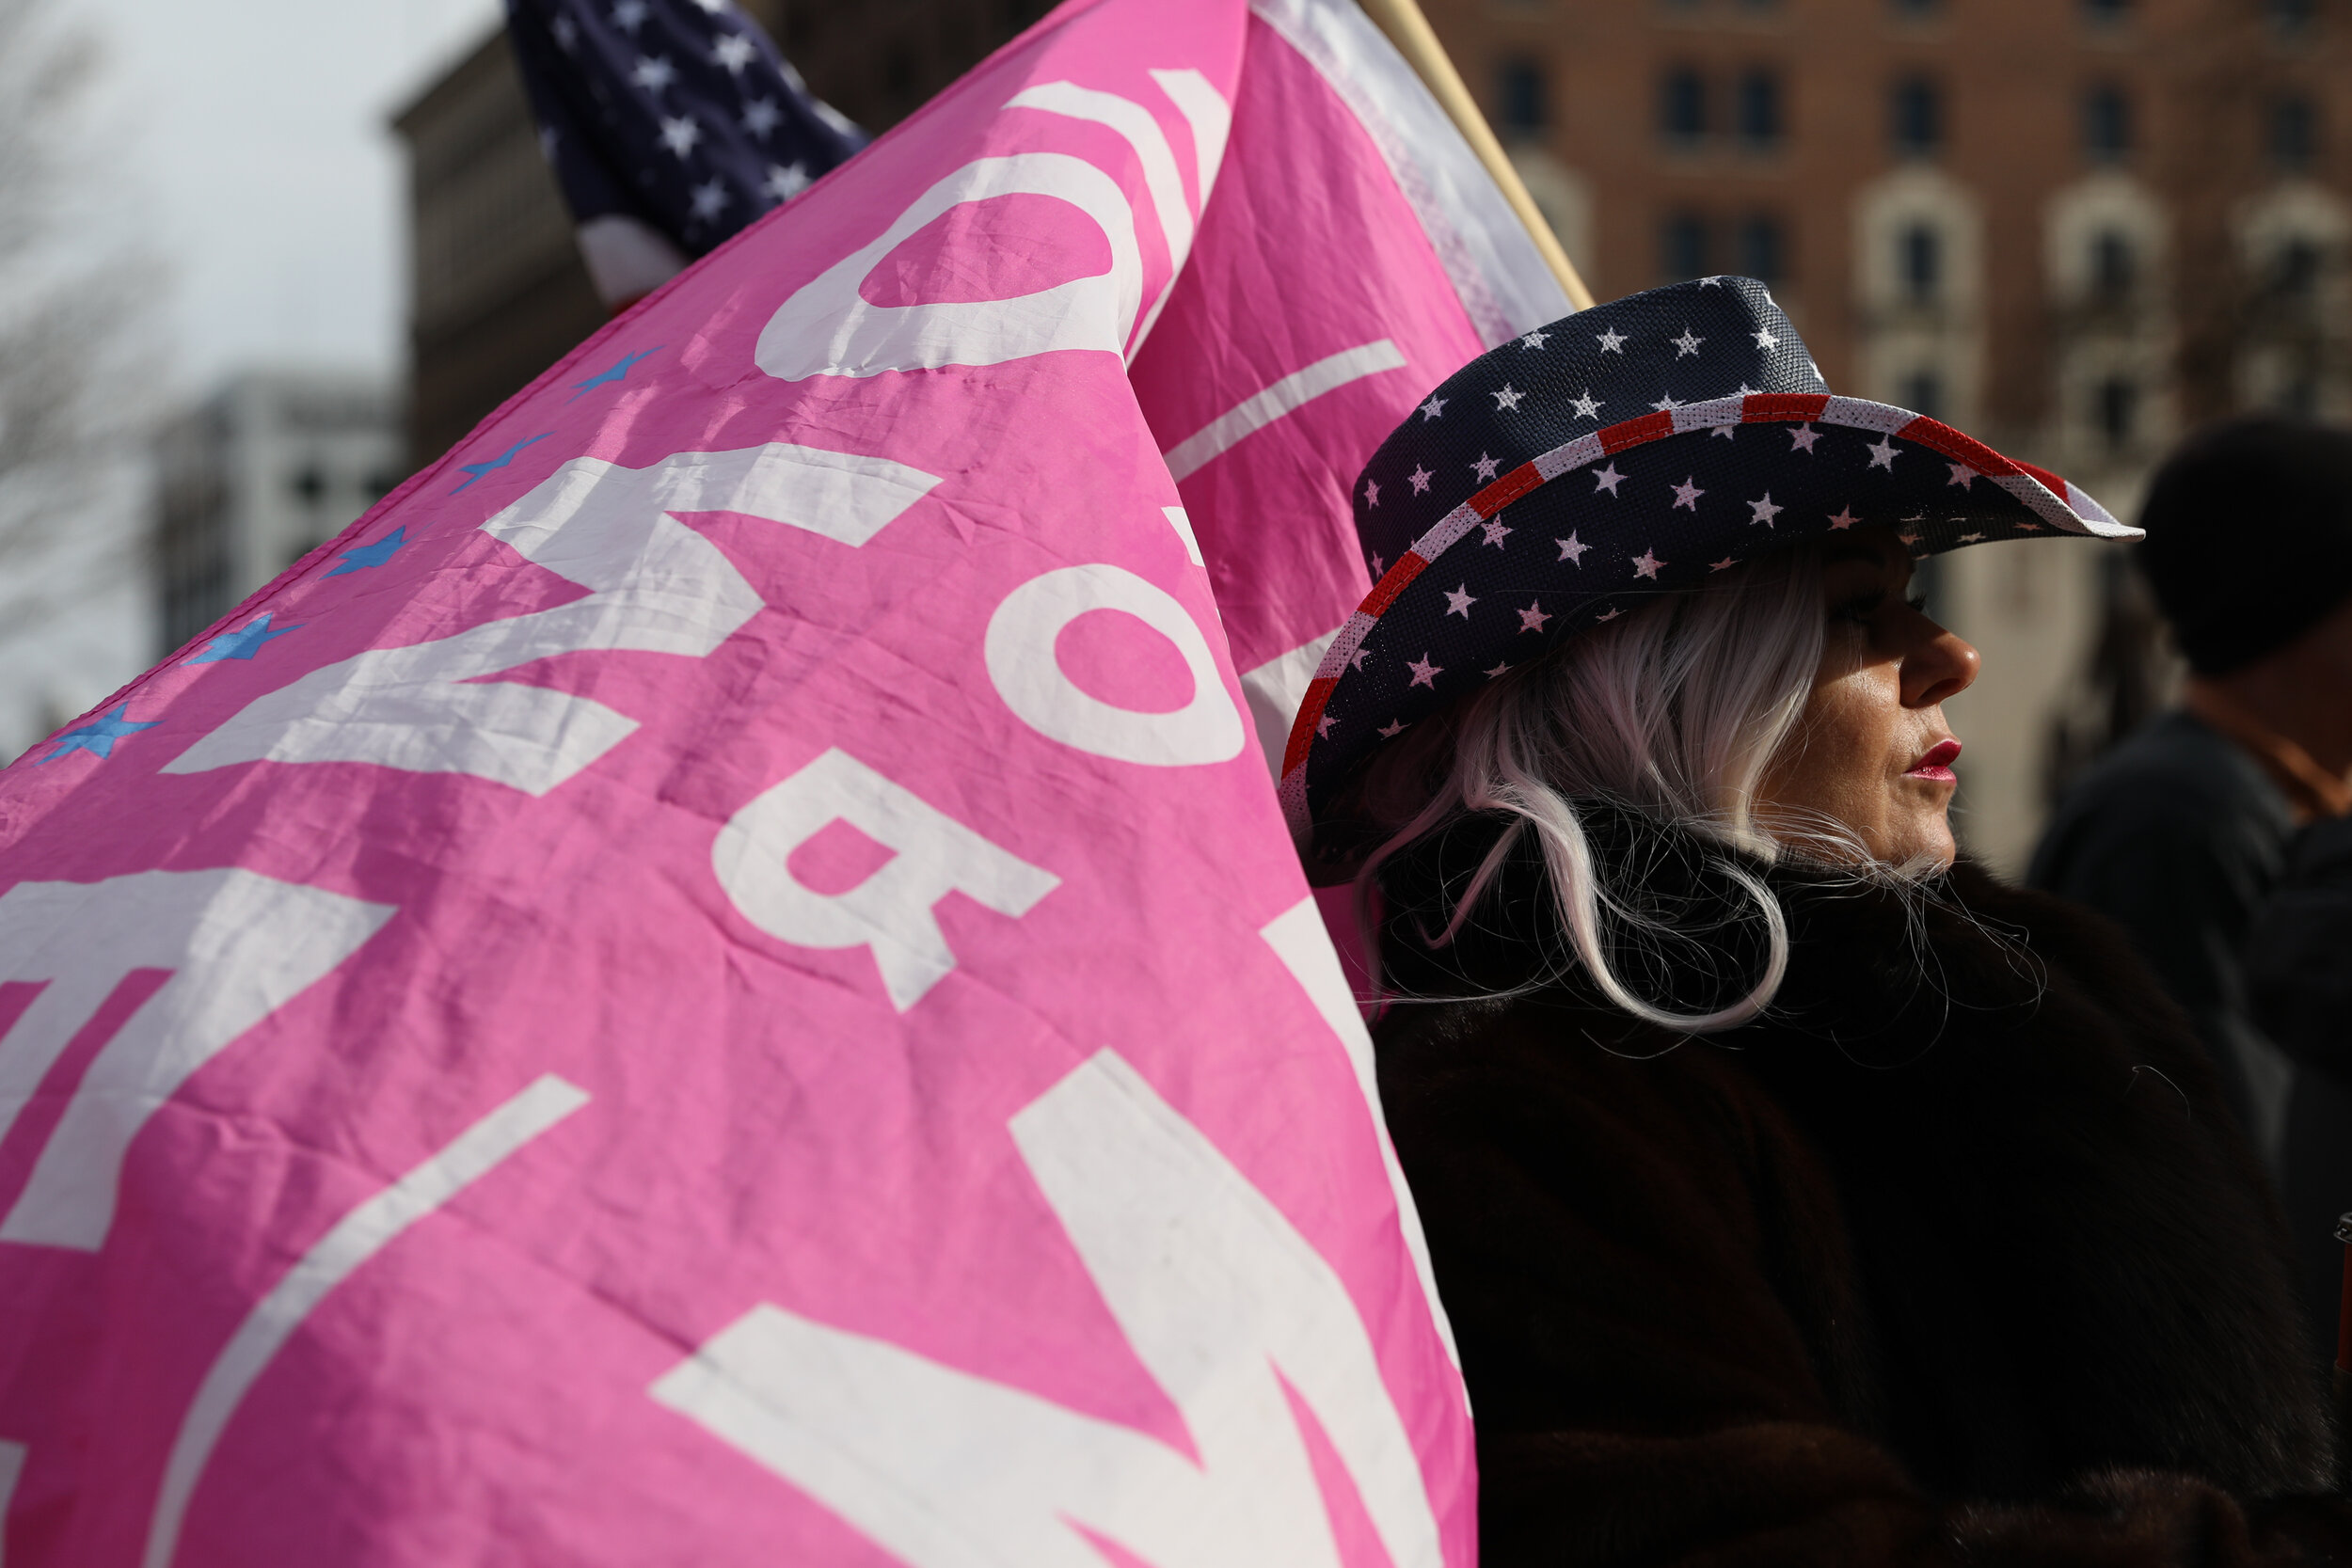  A supporter of U.S. President Donald Trump wears a hat with the colors of the U.S. flag during a "Stop the Steal" protest after the 2020 U.S. presidential election was called for Democratic candidate Joe Biden, in Lansing, Michigan, U.S. November 14